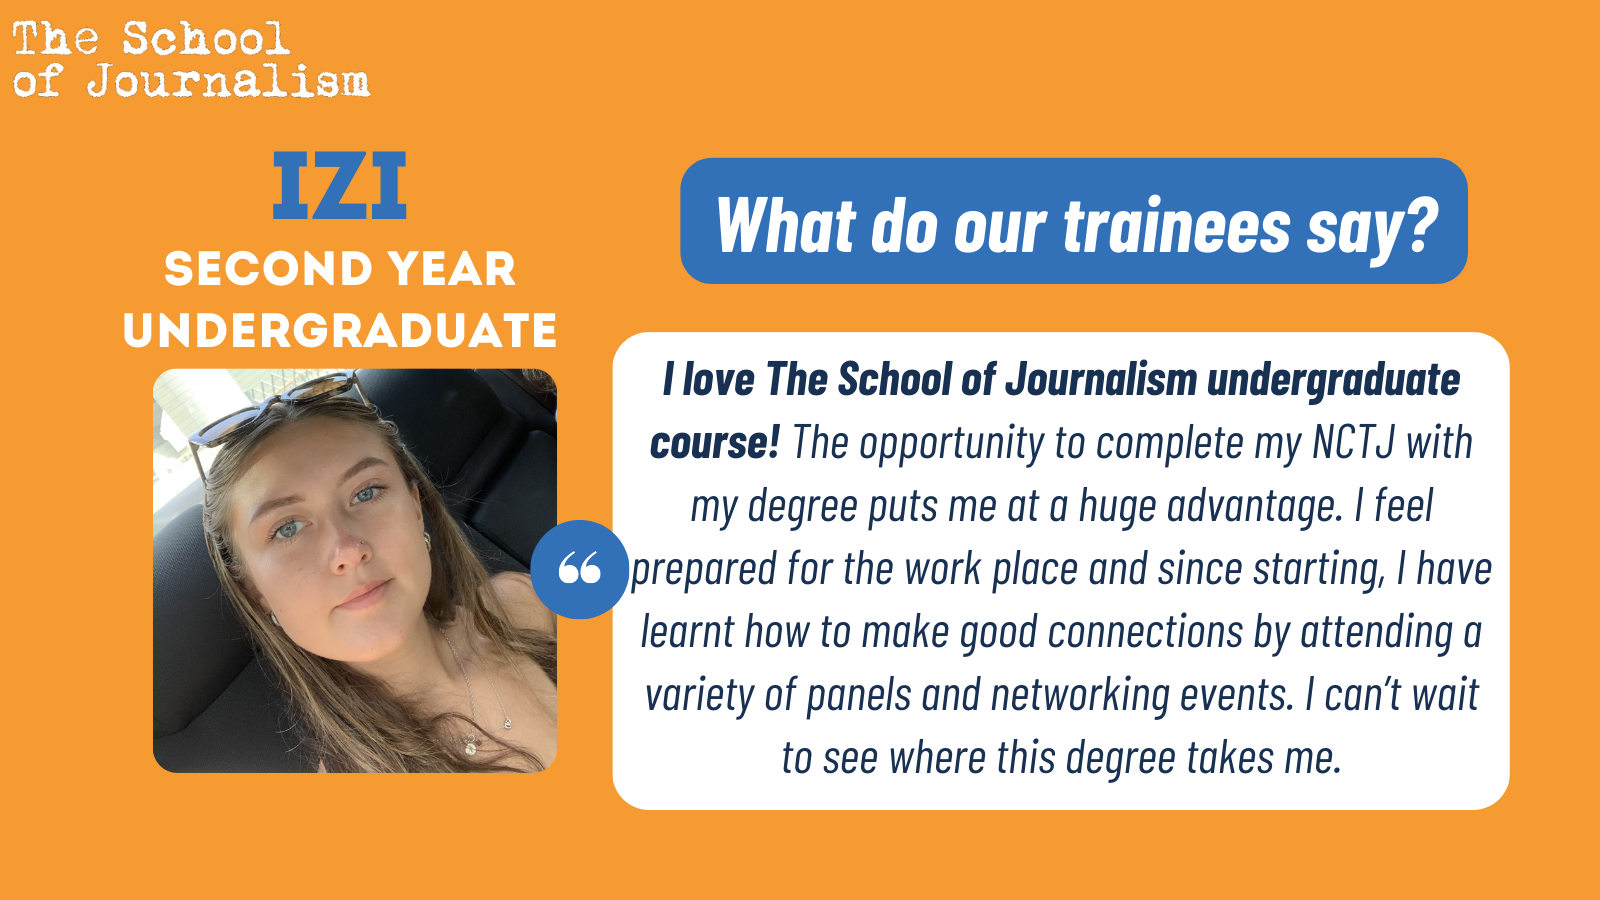 Izi's testimonial: "I love The School of Journalism undergraduate course! The opportunity to complete my NCTJ with my degree puts me at a huge advantage. I feel prepared for the work place and since starting, I have learnt how to make good connections by attending a variety of panels and networking events. I can’t wait to see where this degree takes me."